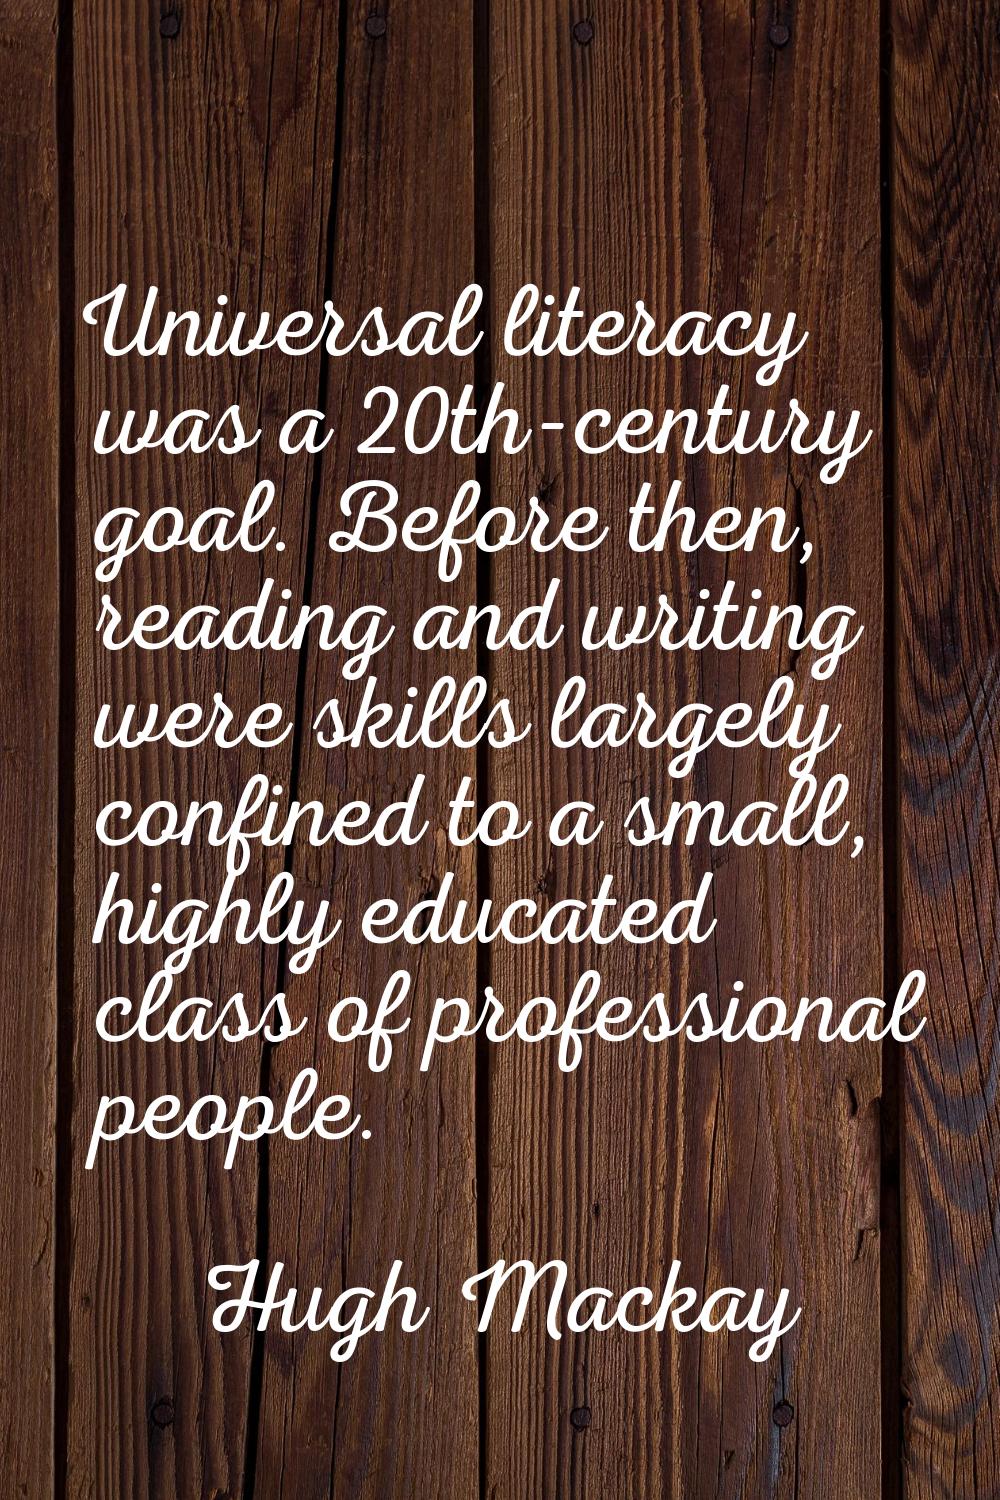 Universal literacy was a 20th-century goal. Before then, reading and writing were skills largely co